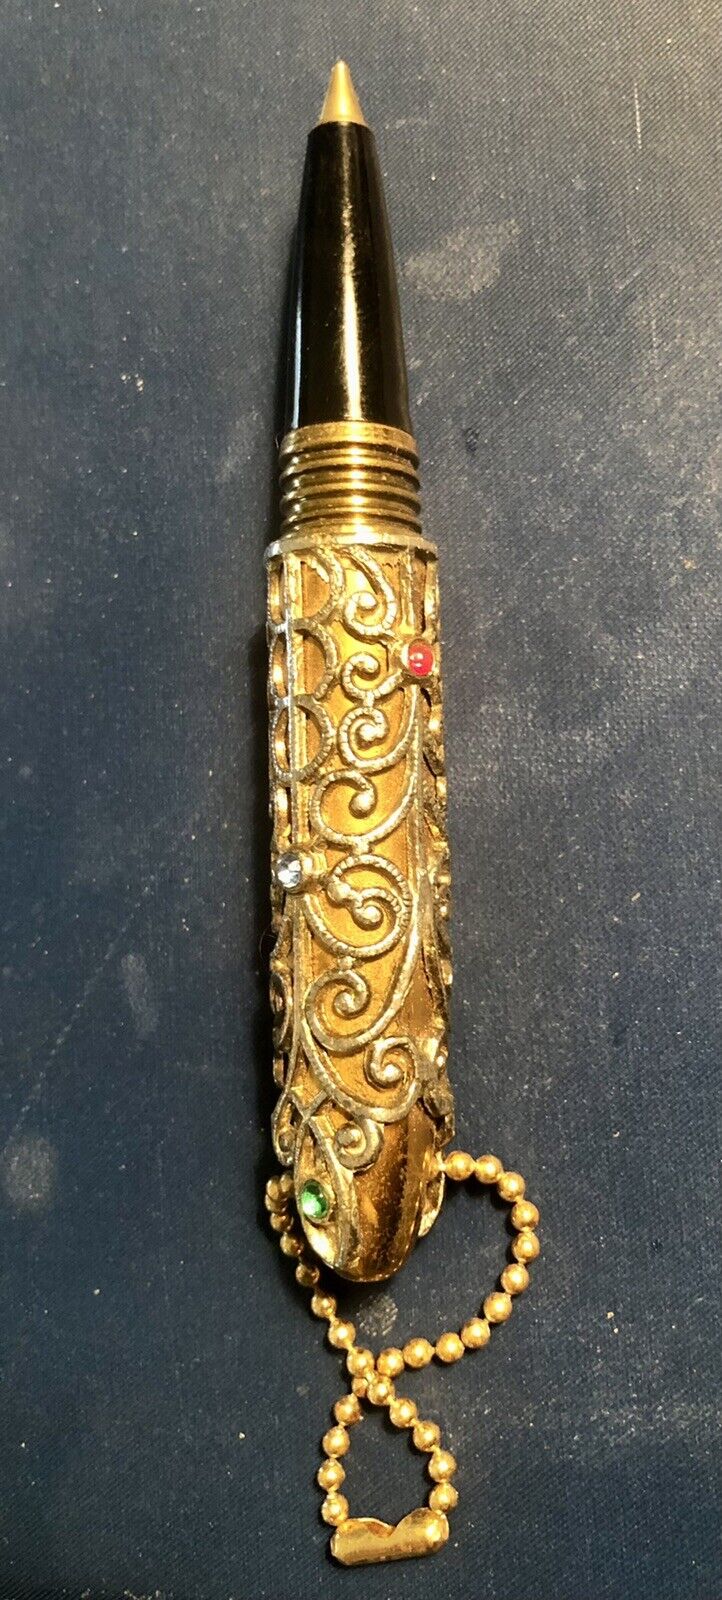 Ball-point Pen With Jewels / Rhinestones Heavy Brass - 2.5” Closed - 4” Posted